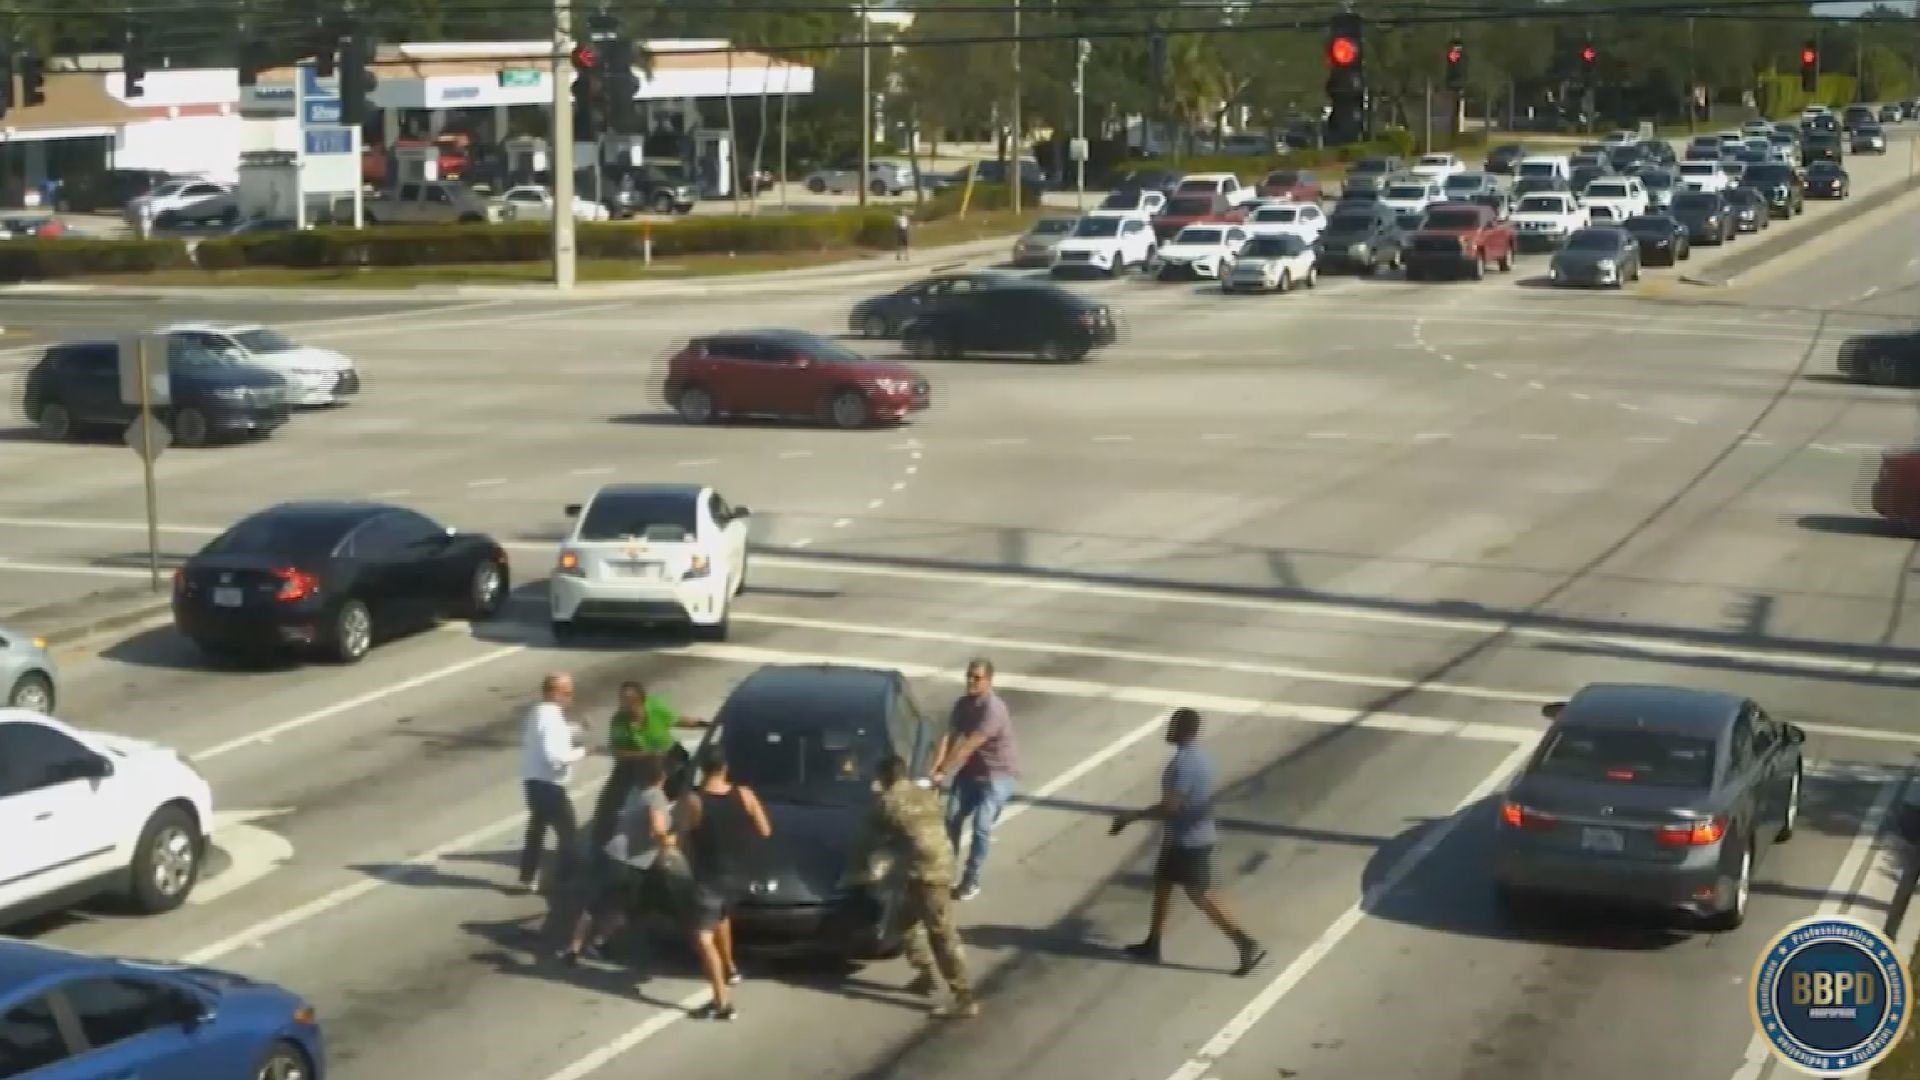 Video shows the car crossing the intersection before multiple people worked to push and hold the car in place.